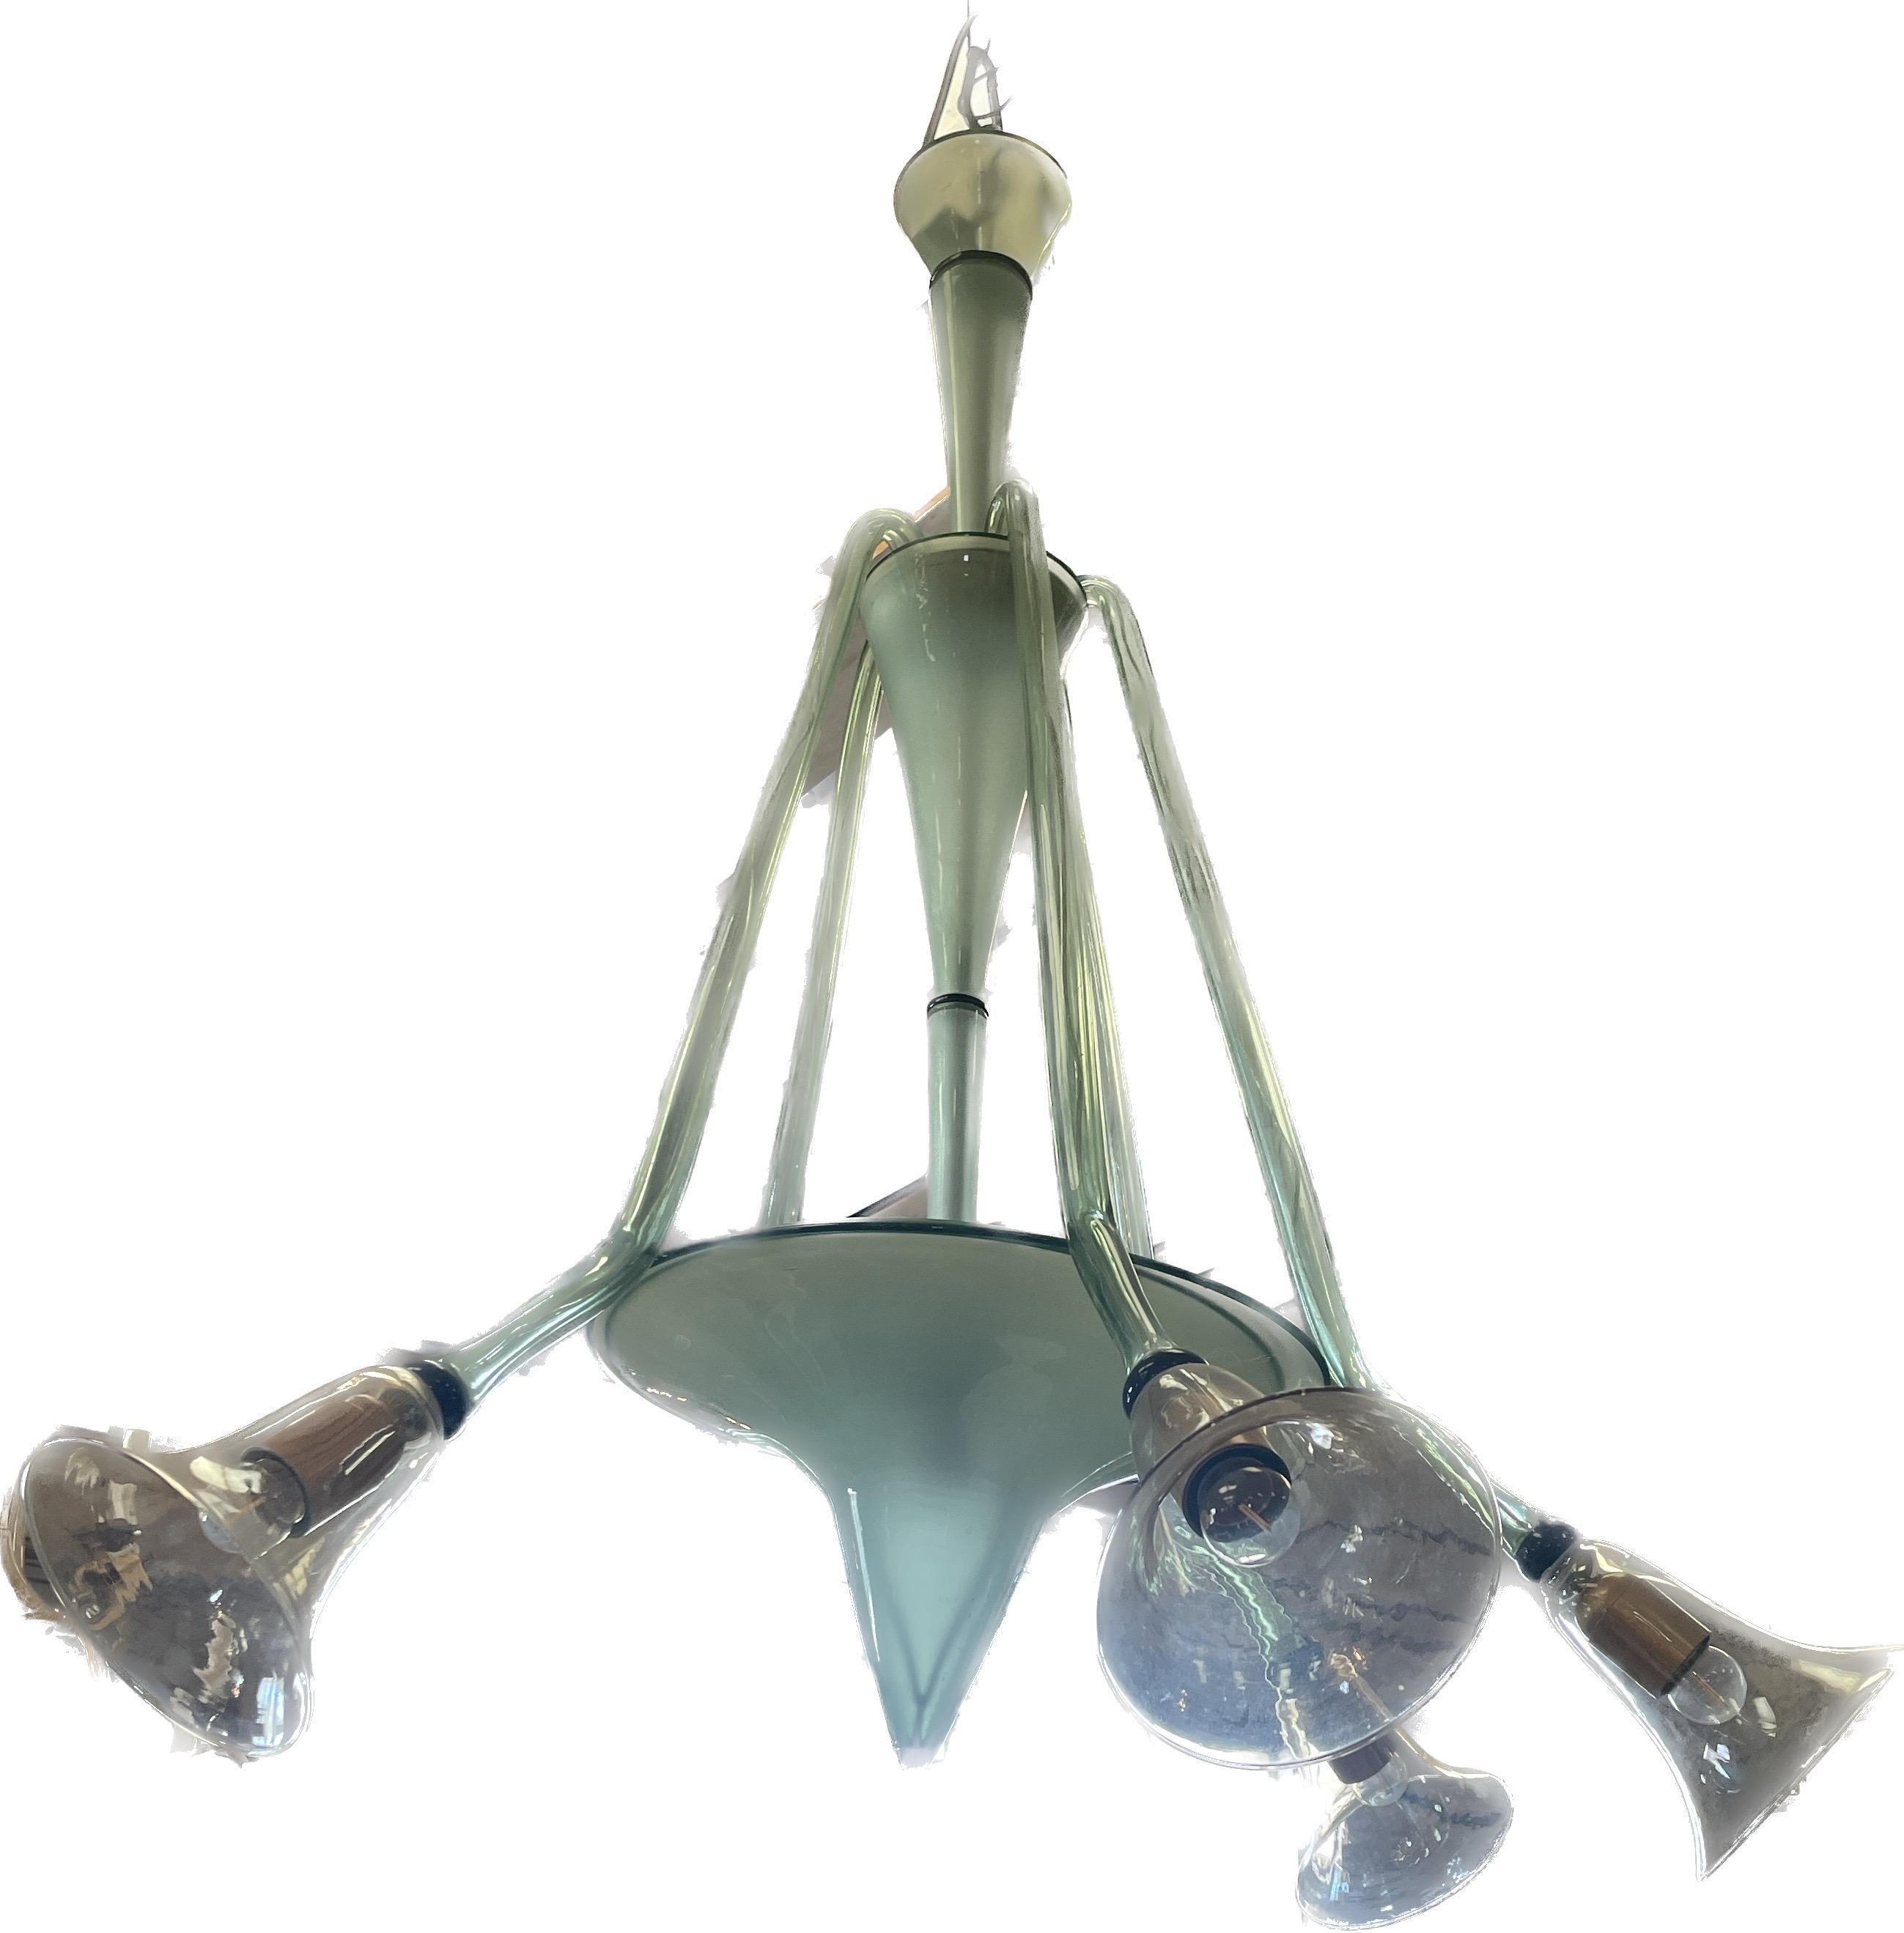 This Murano pendant is a beautiful color of pale celery green. It has 5 arms and will give any room that added look of chic design.
Dimensions are 35 w x 41 t